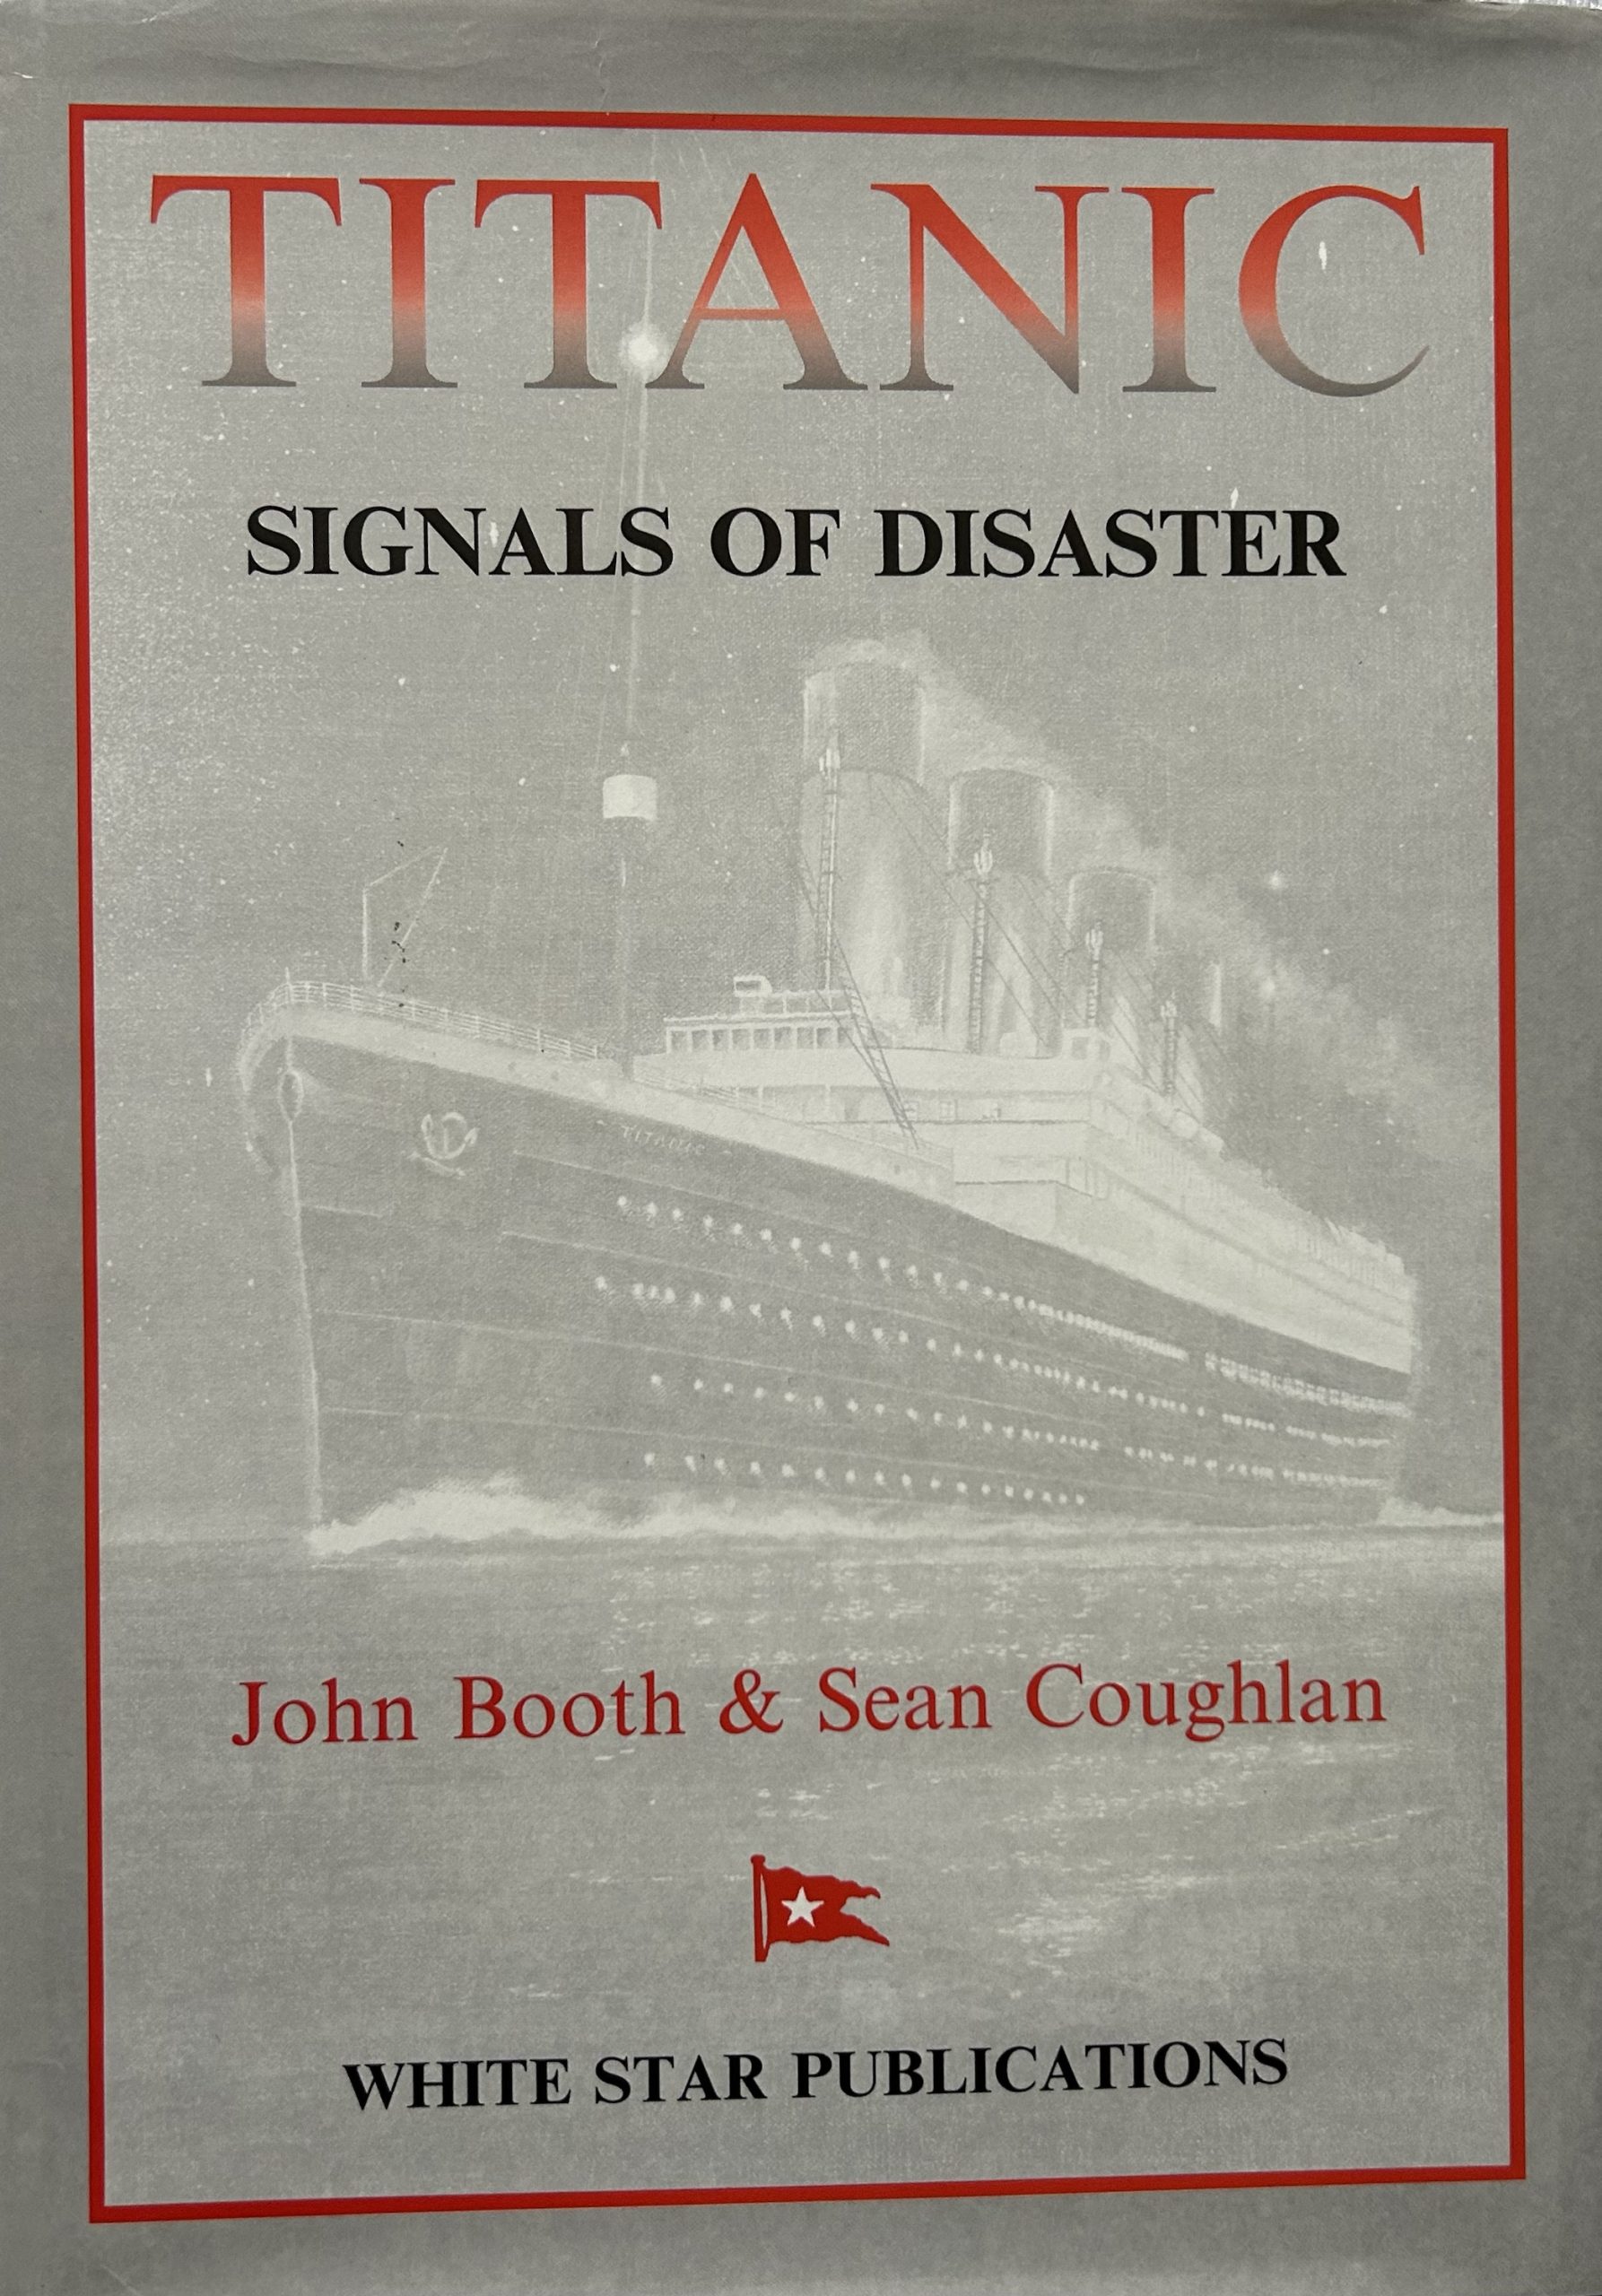 Titanic: Signals of Disaster by John Booth